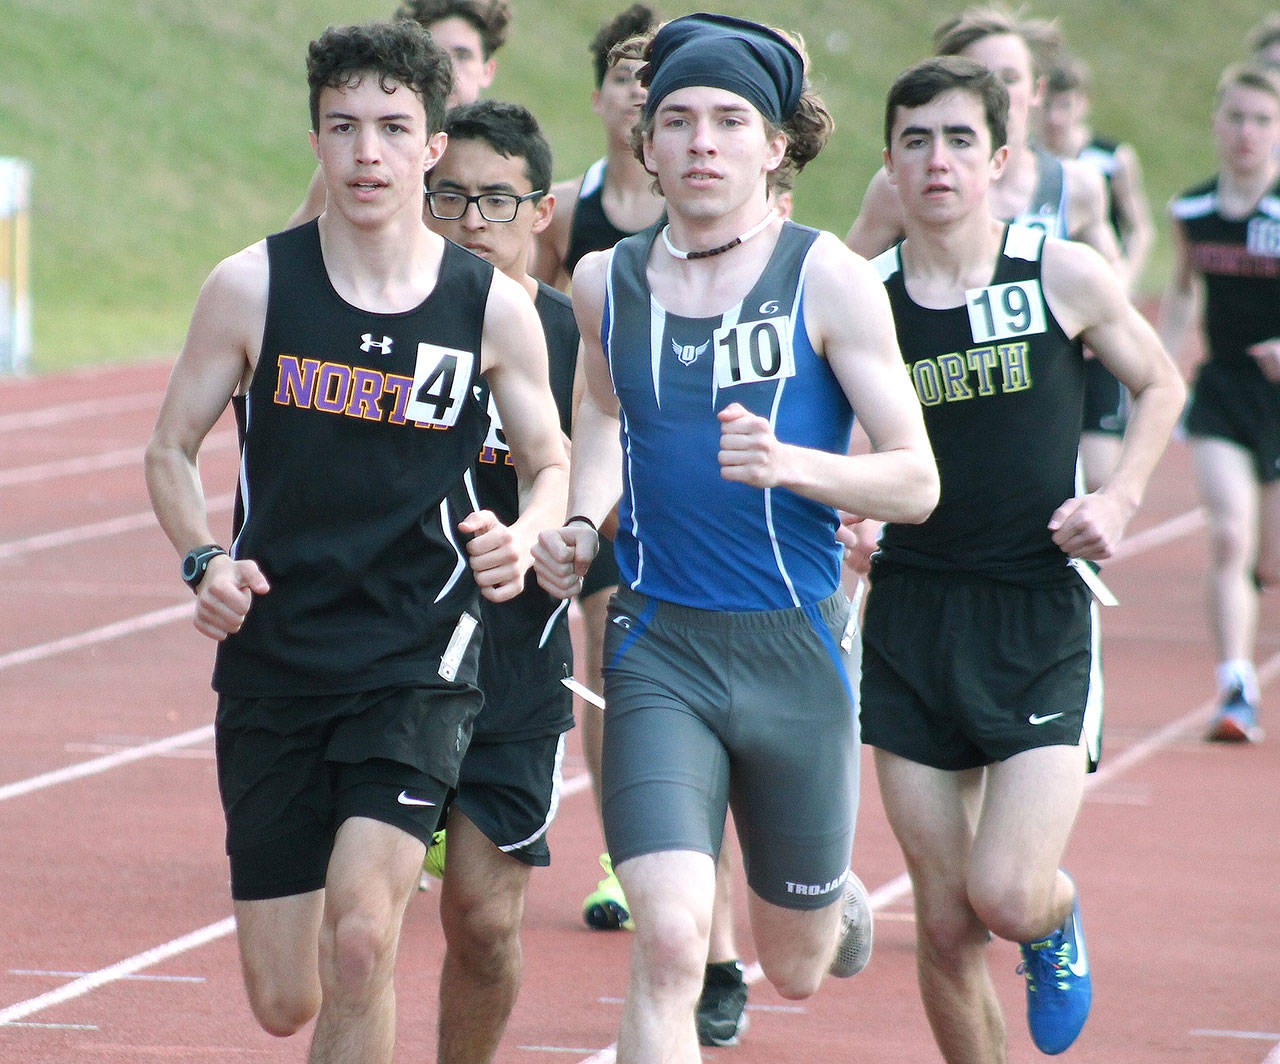 Olympic’s Scott Ashcraft (10) runs neck-and-neck with North Kitsap’s Max Metters in the 1600-meter run. (Mark Krulish/Kitsap News Group)